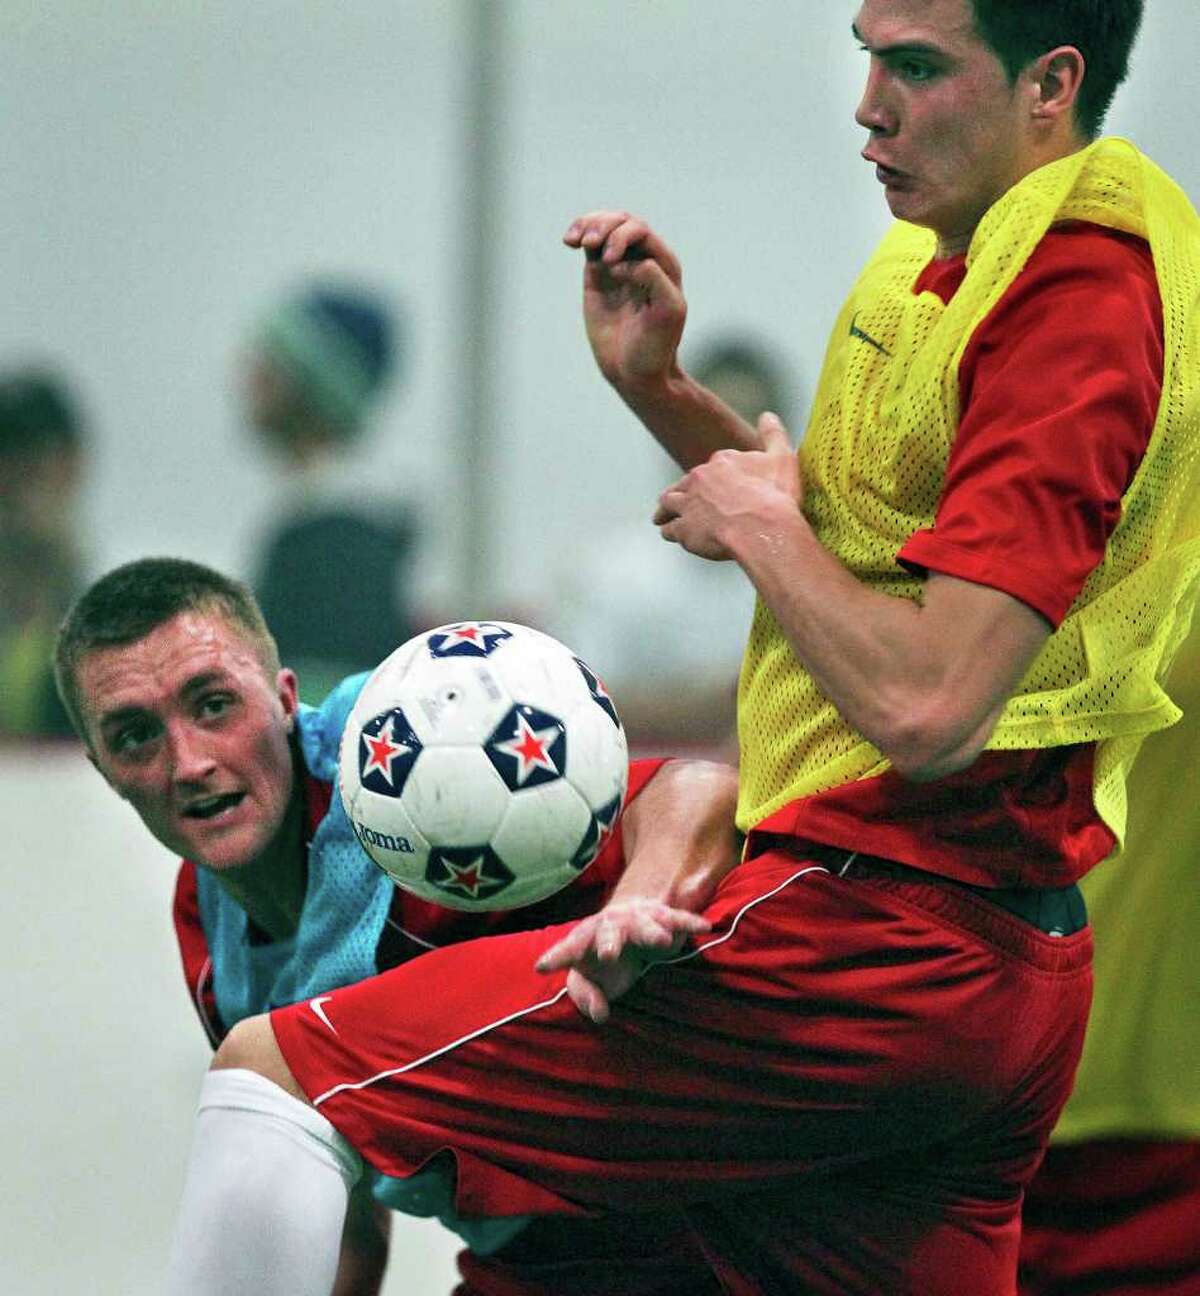 Brandon Swartzendruber (left) battles against Karsten Smith for possession of the ball as the San Antonio Scorpions hold their first practice indoors at the Northwoods on February 18, 2012 Tom Reel/ San Antonio Express-News